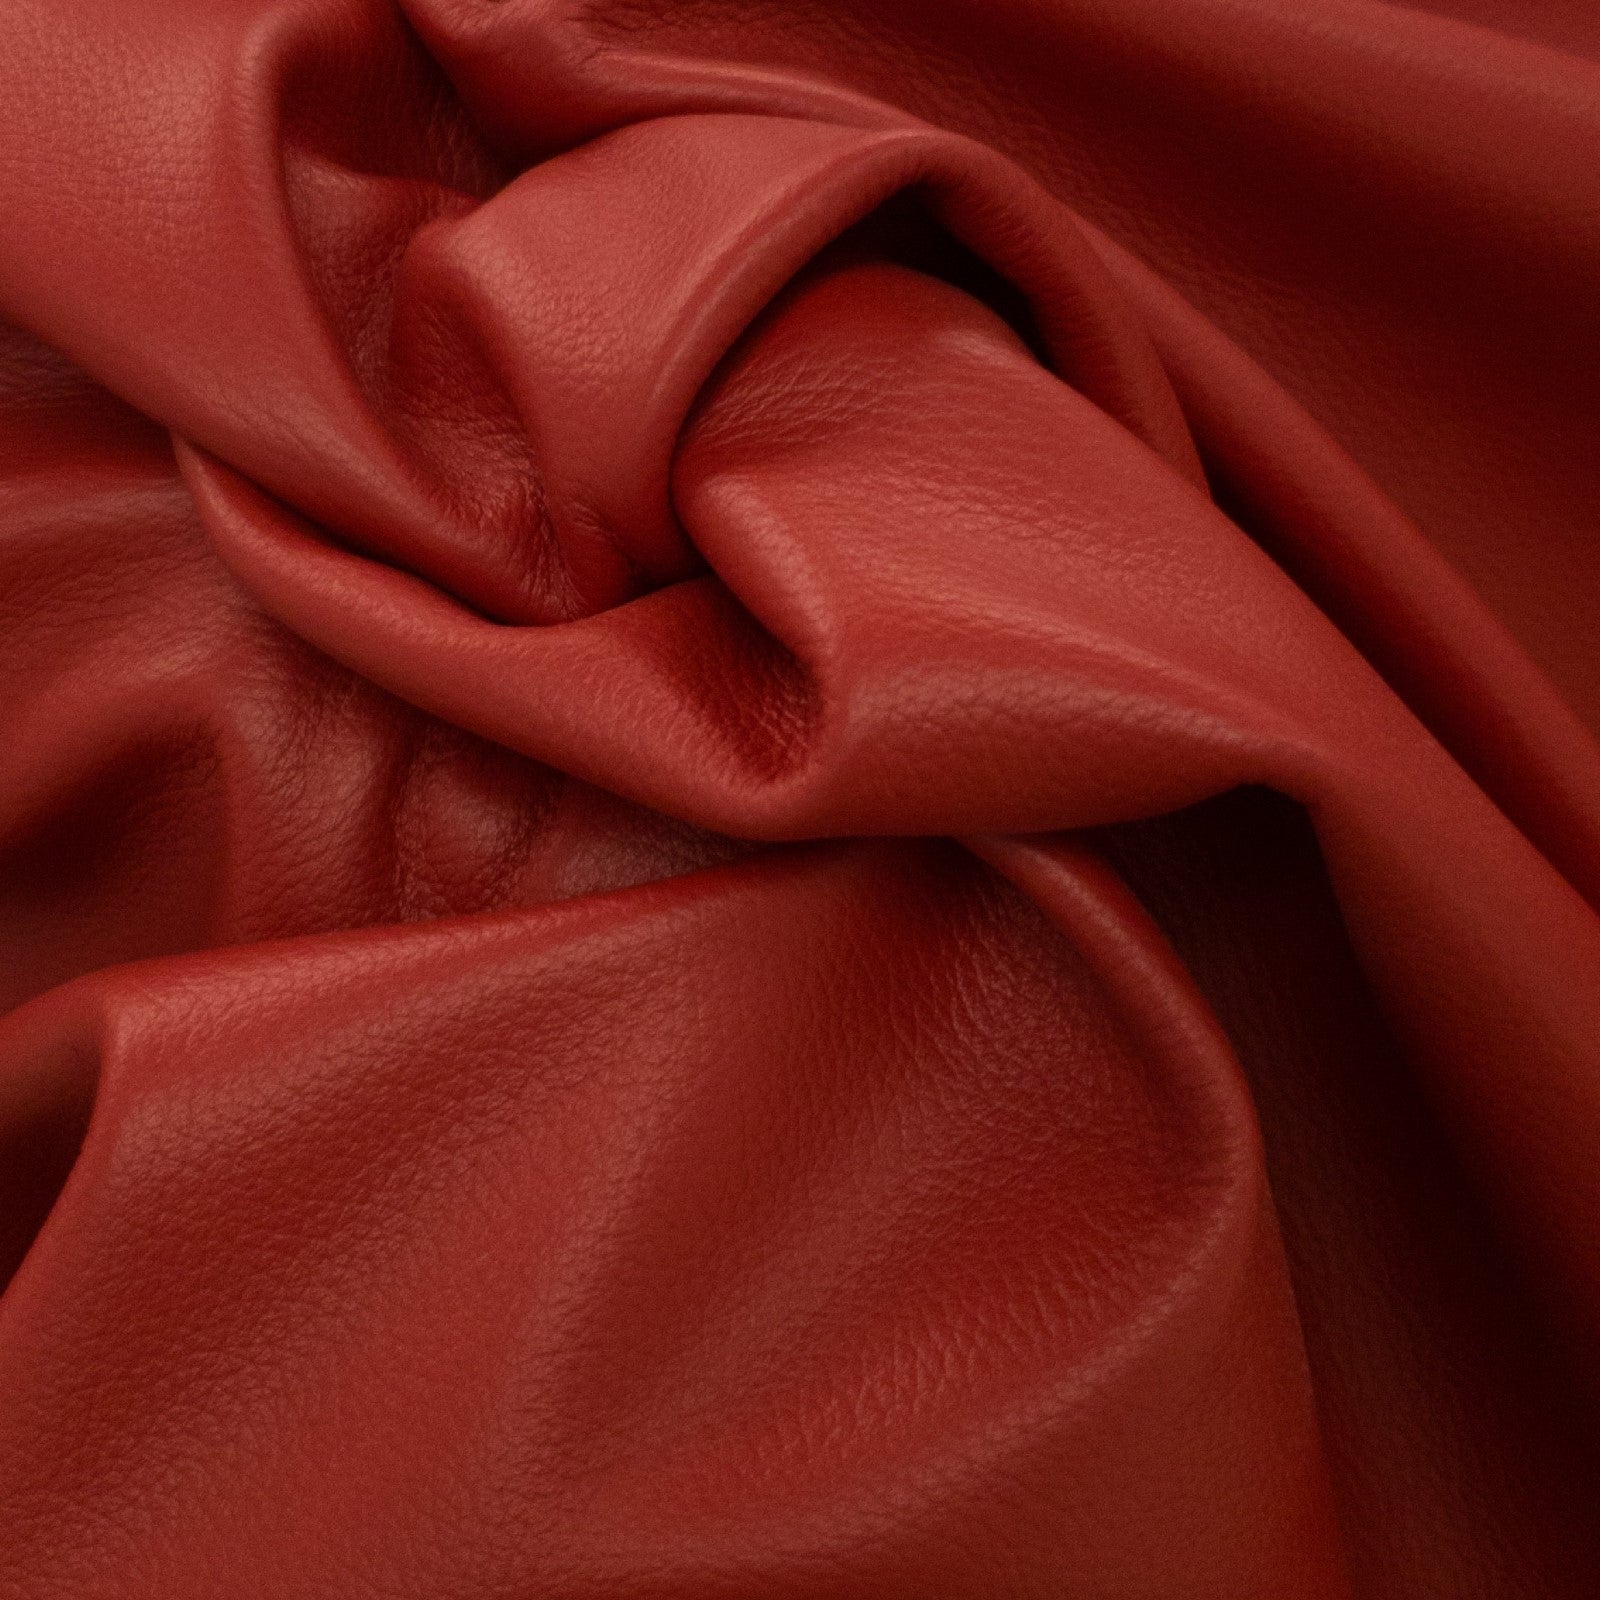 Red, 2-4 oz, 33-64 SqFt, Full Upholstery Cow Hides, Lipstick Red / 57-64 / 2-3 | The Leather Guy